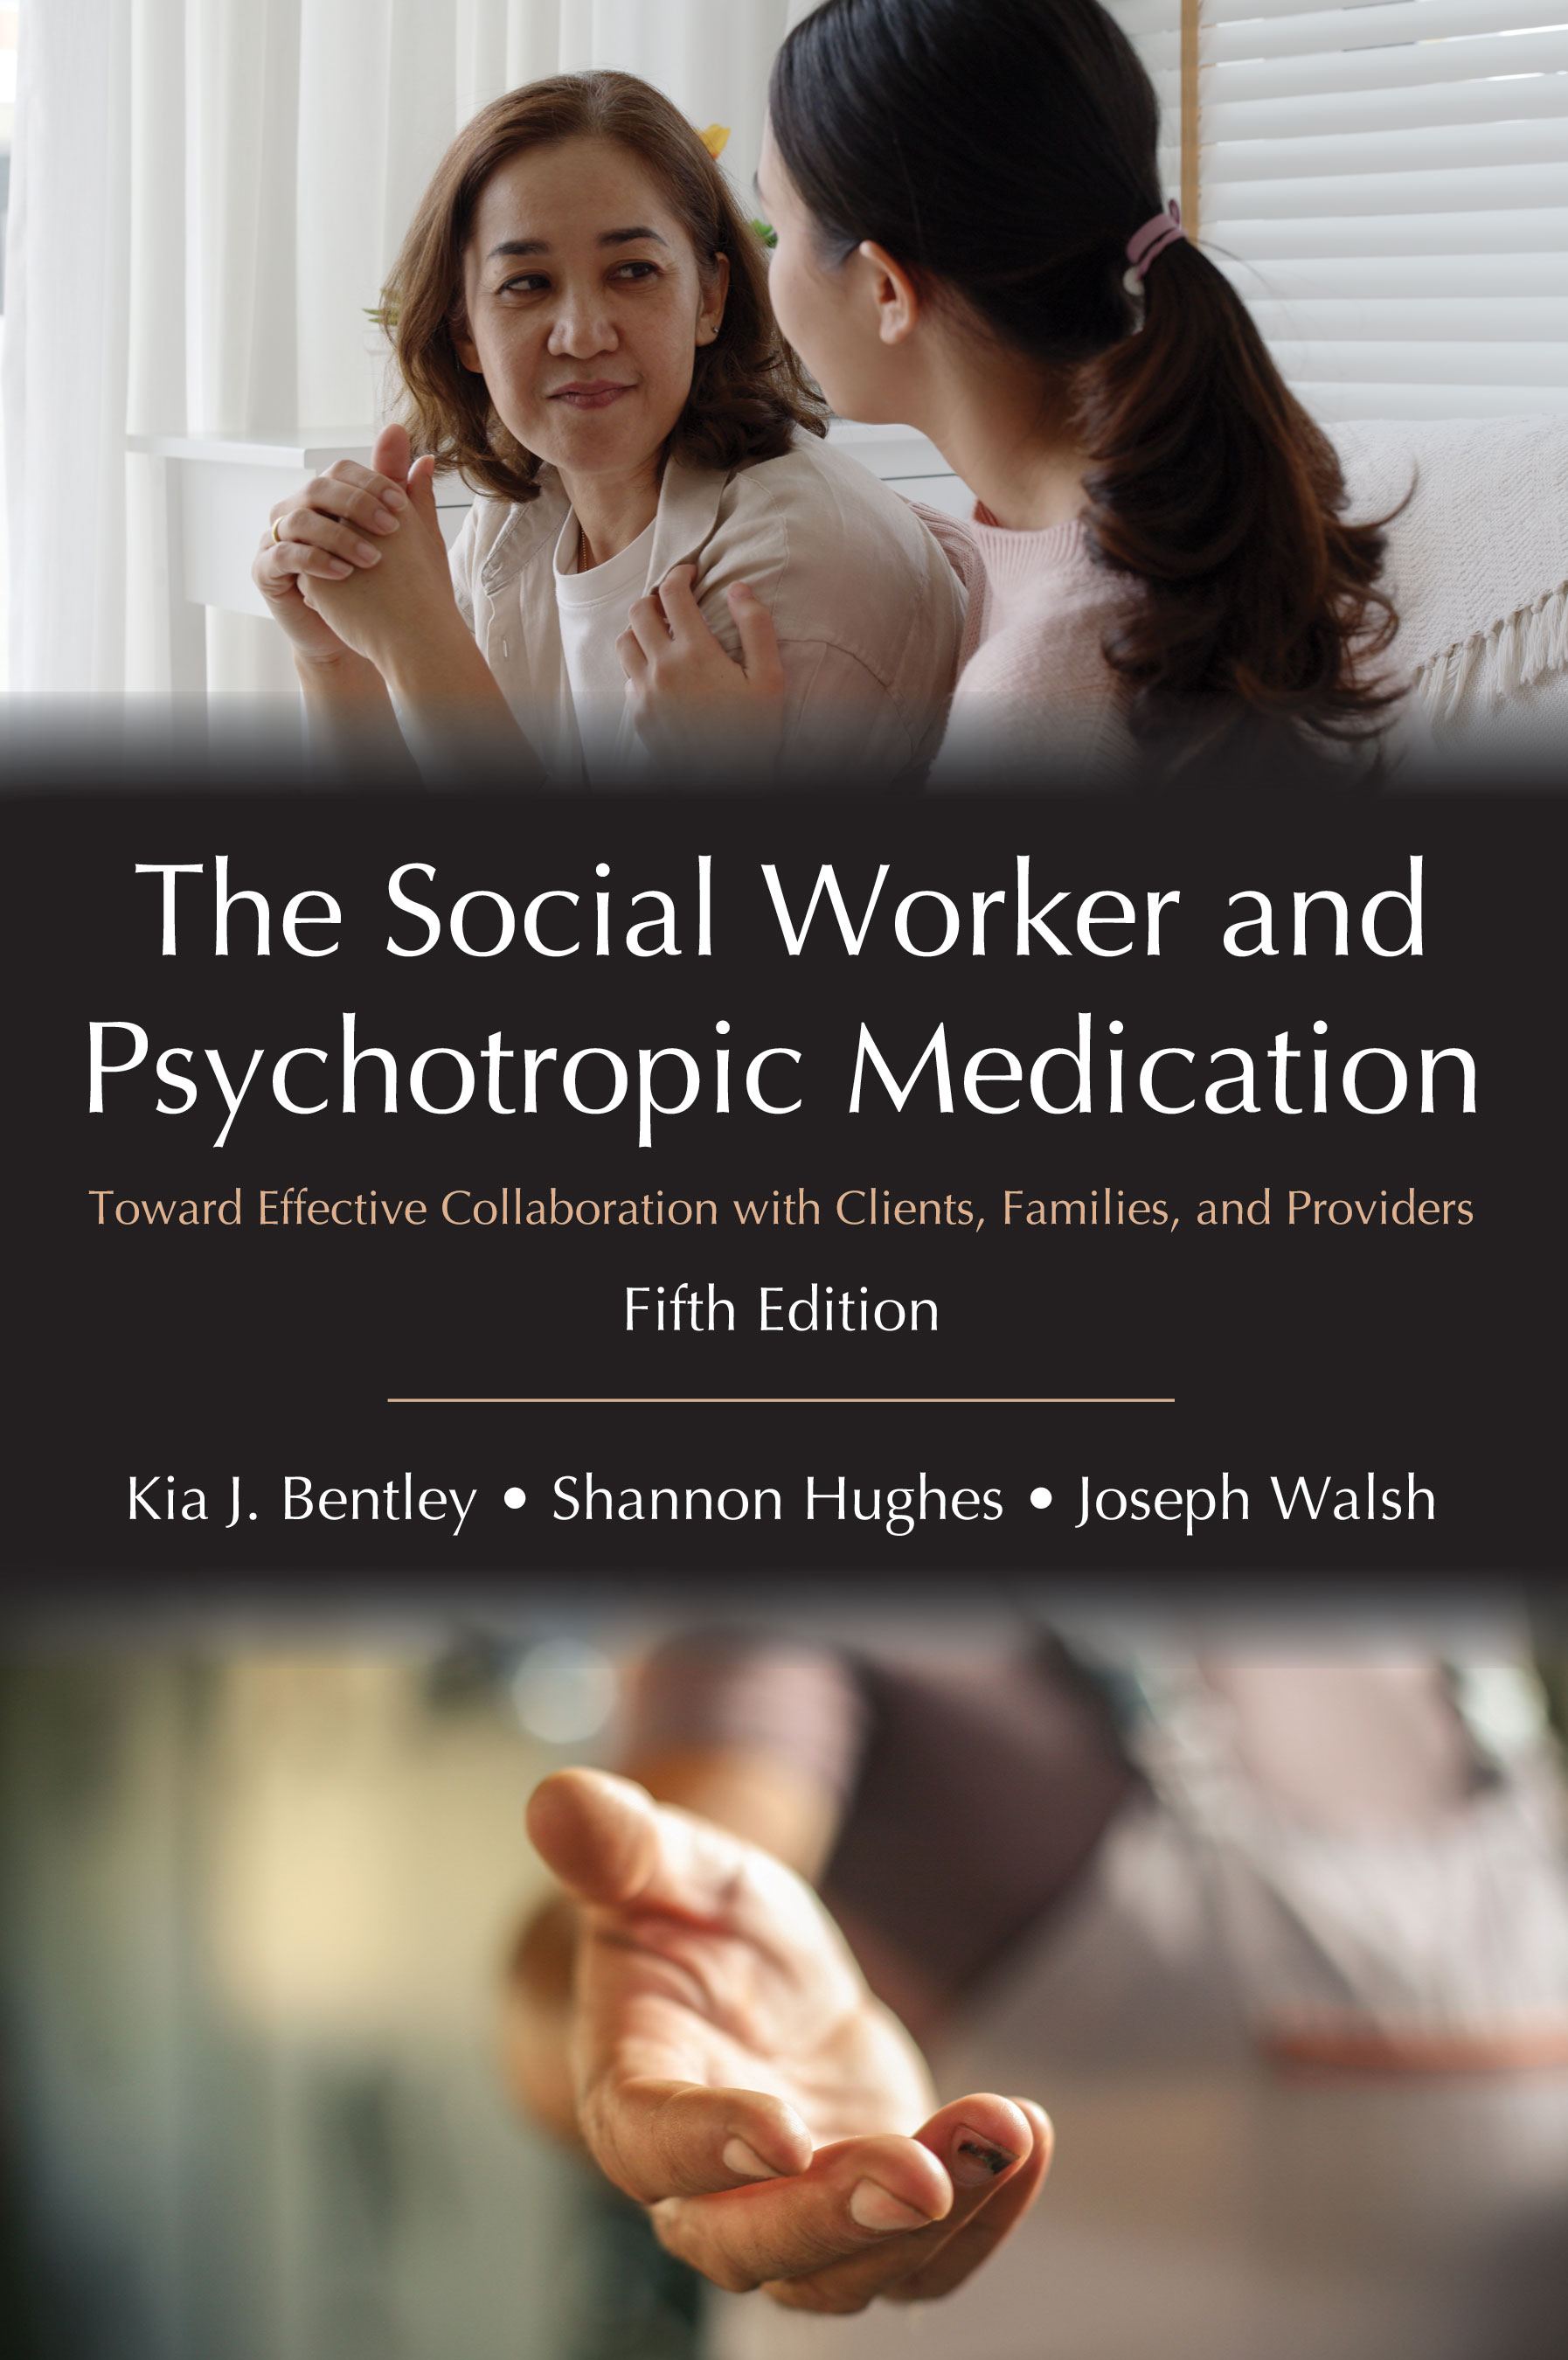 The Social Worker and Psychotropic Medication: Toward Effective Collaboration with Clients, Families, and Providers, Fifth Edition by Kia J. Bentley, Shannon  Hughes, Joseph  Walsh